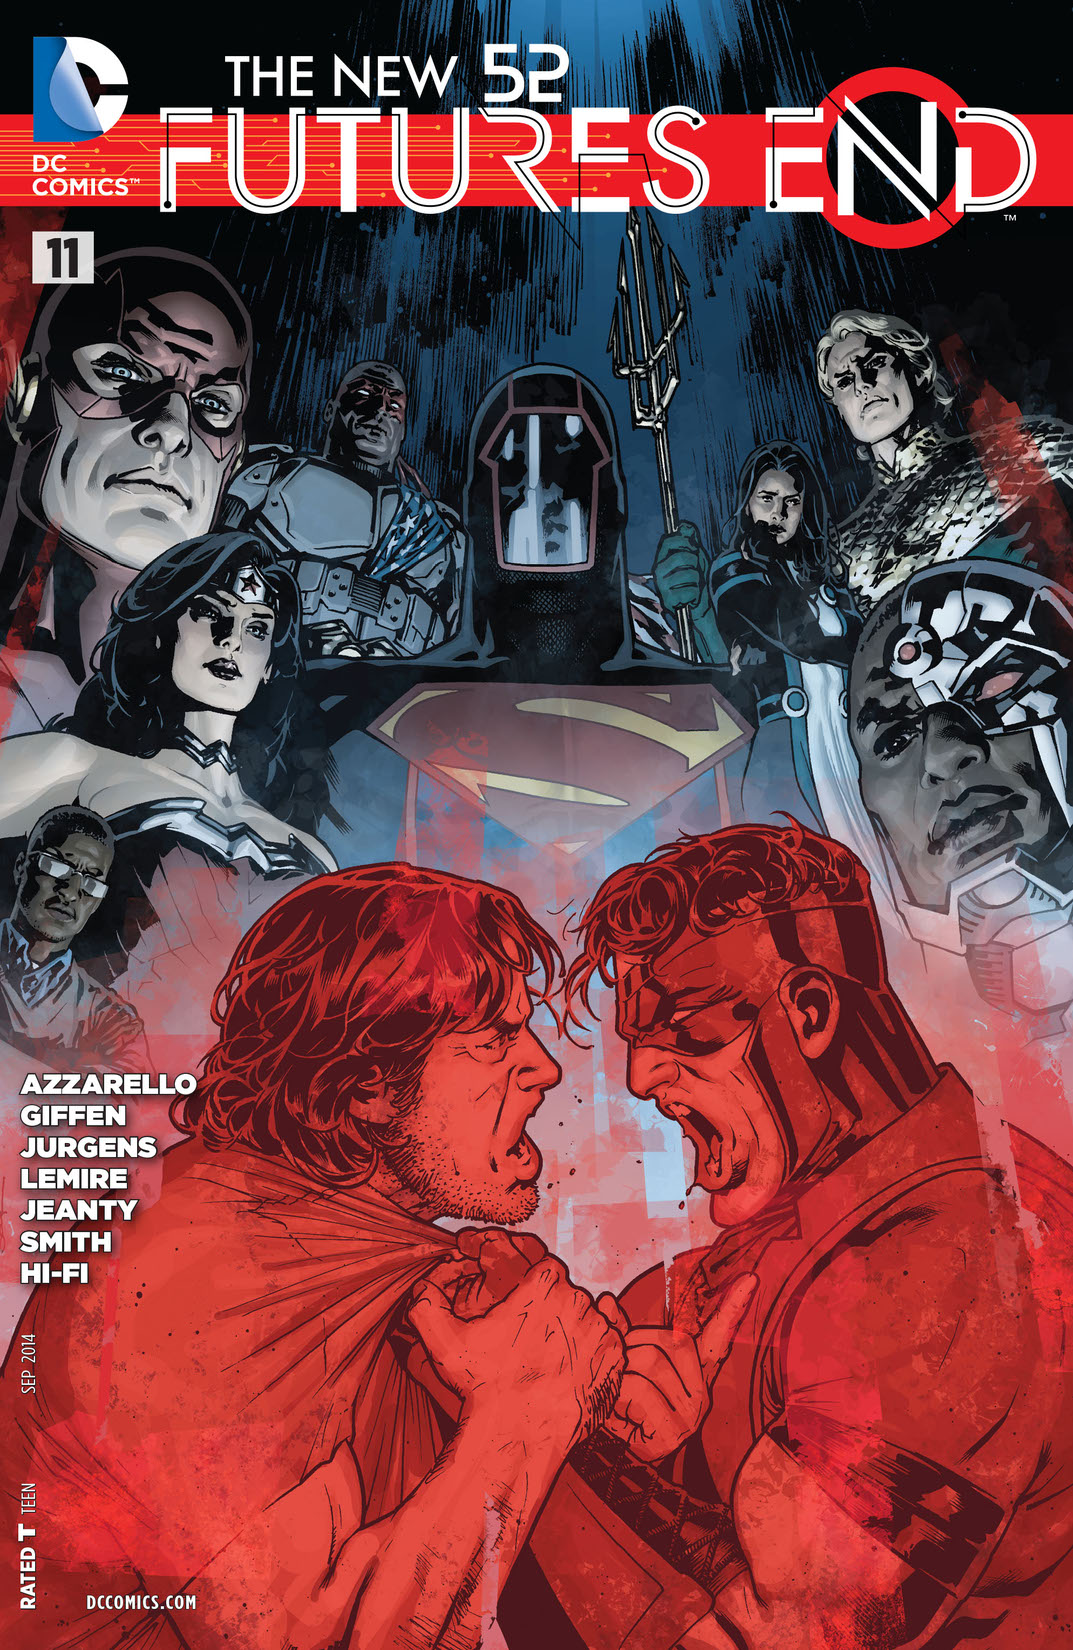 The New 52: Futures End #11 preview images